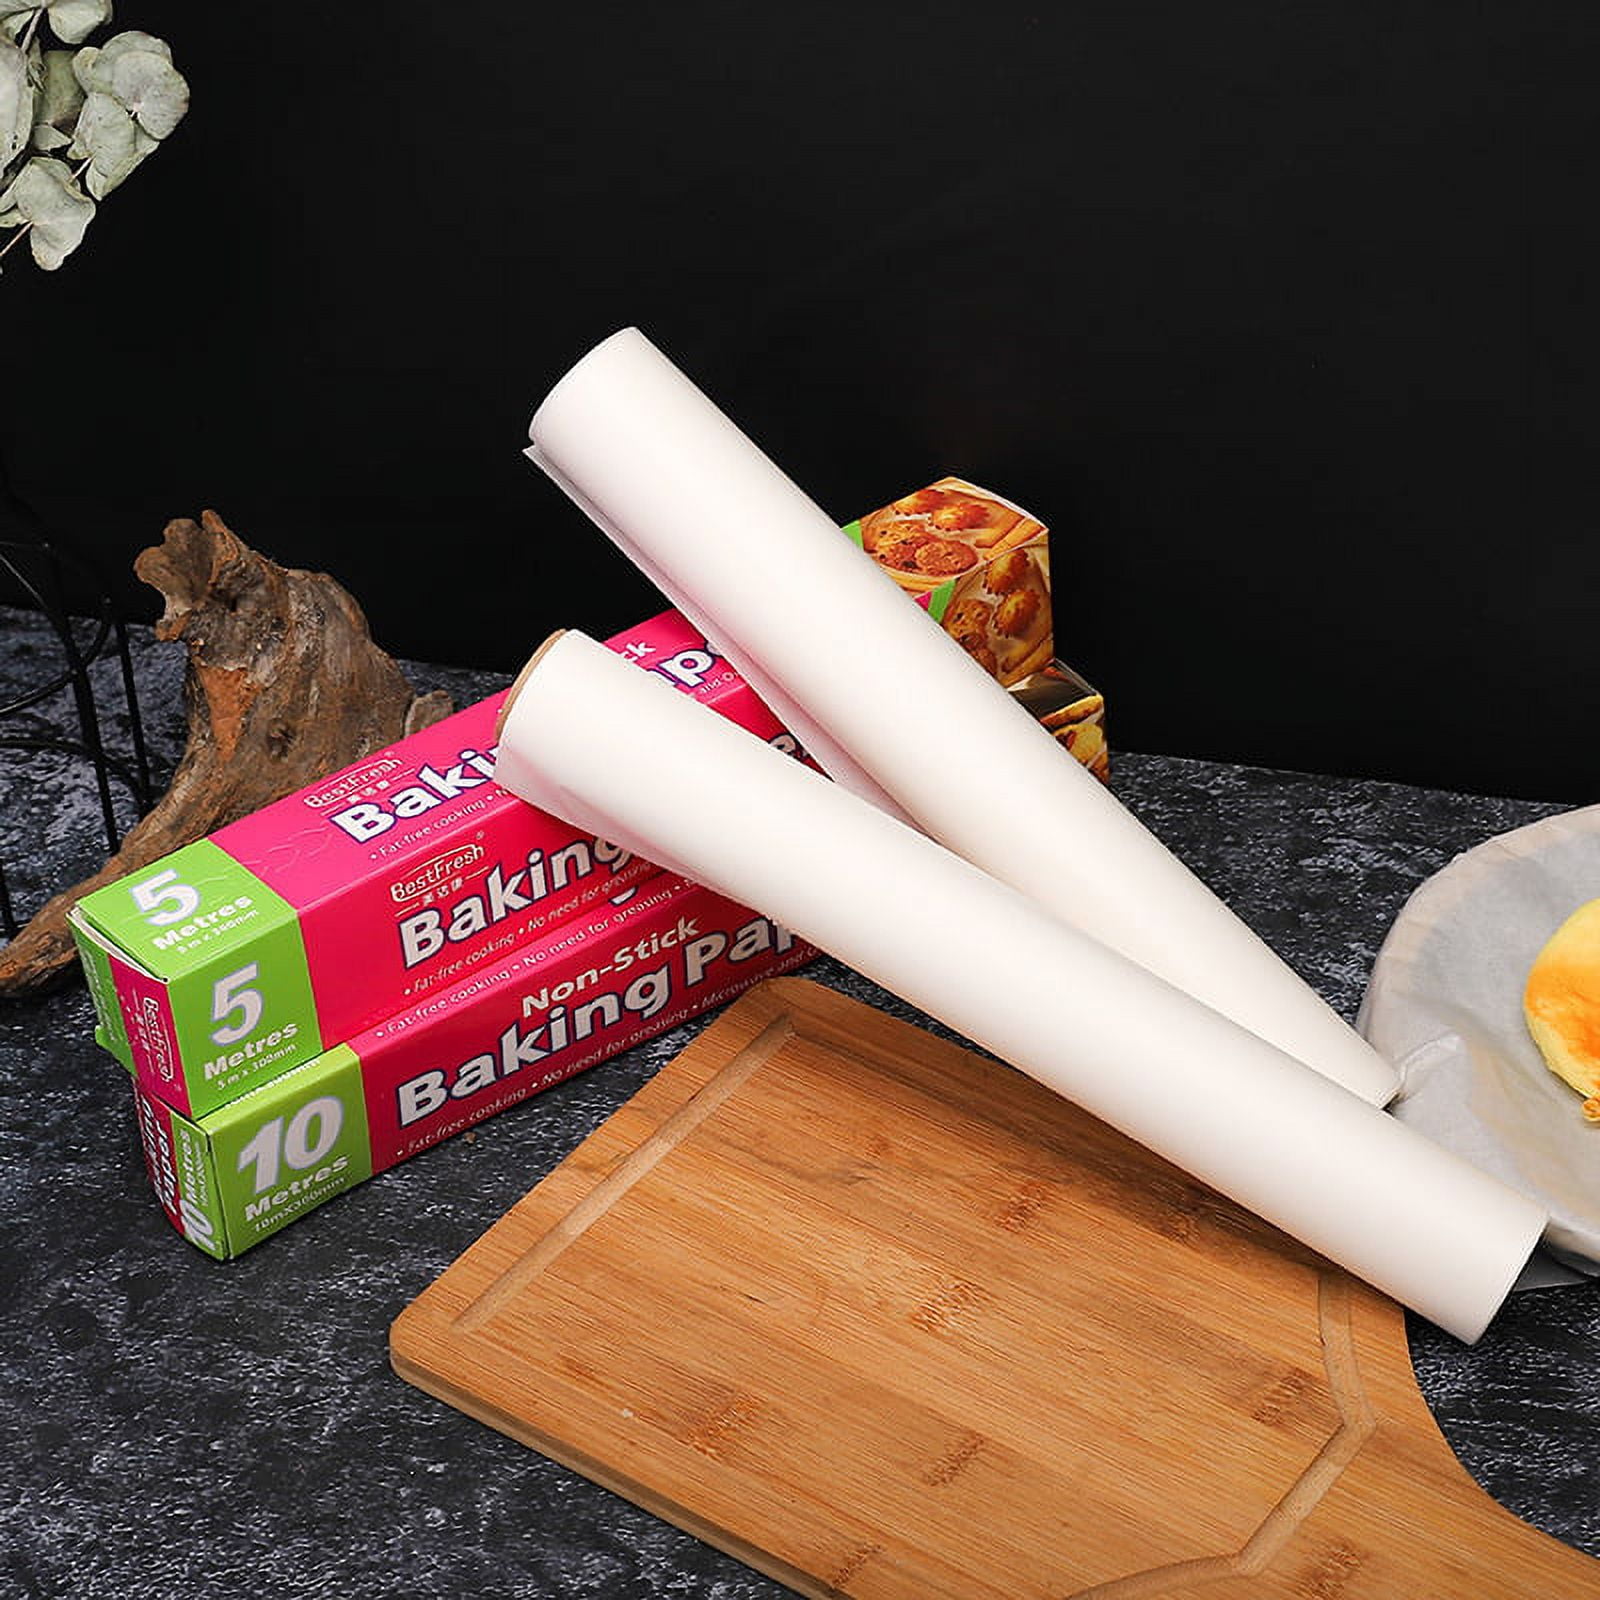 Parchment Paper for Baking, Non-stick Parchment Paper Roll, High  Temperature Resistant, Waterproof and Greaseproof Baking Paper For Bread,  Cookies, Heat Press, Pans, Oven, Air Fry 